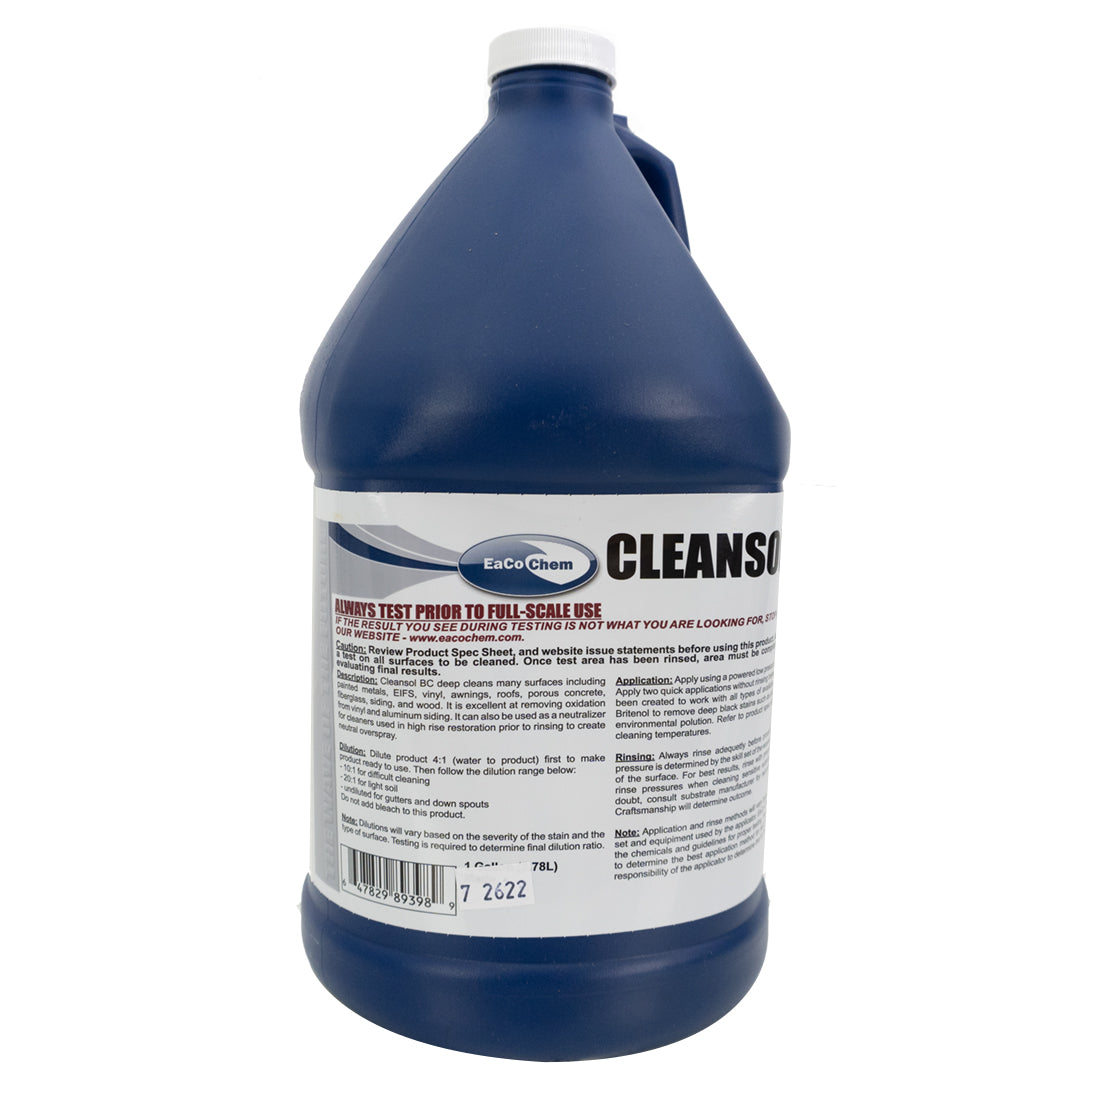 IGOCHEM - Cleaning and construction chemicals